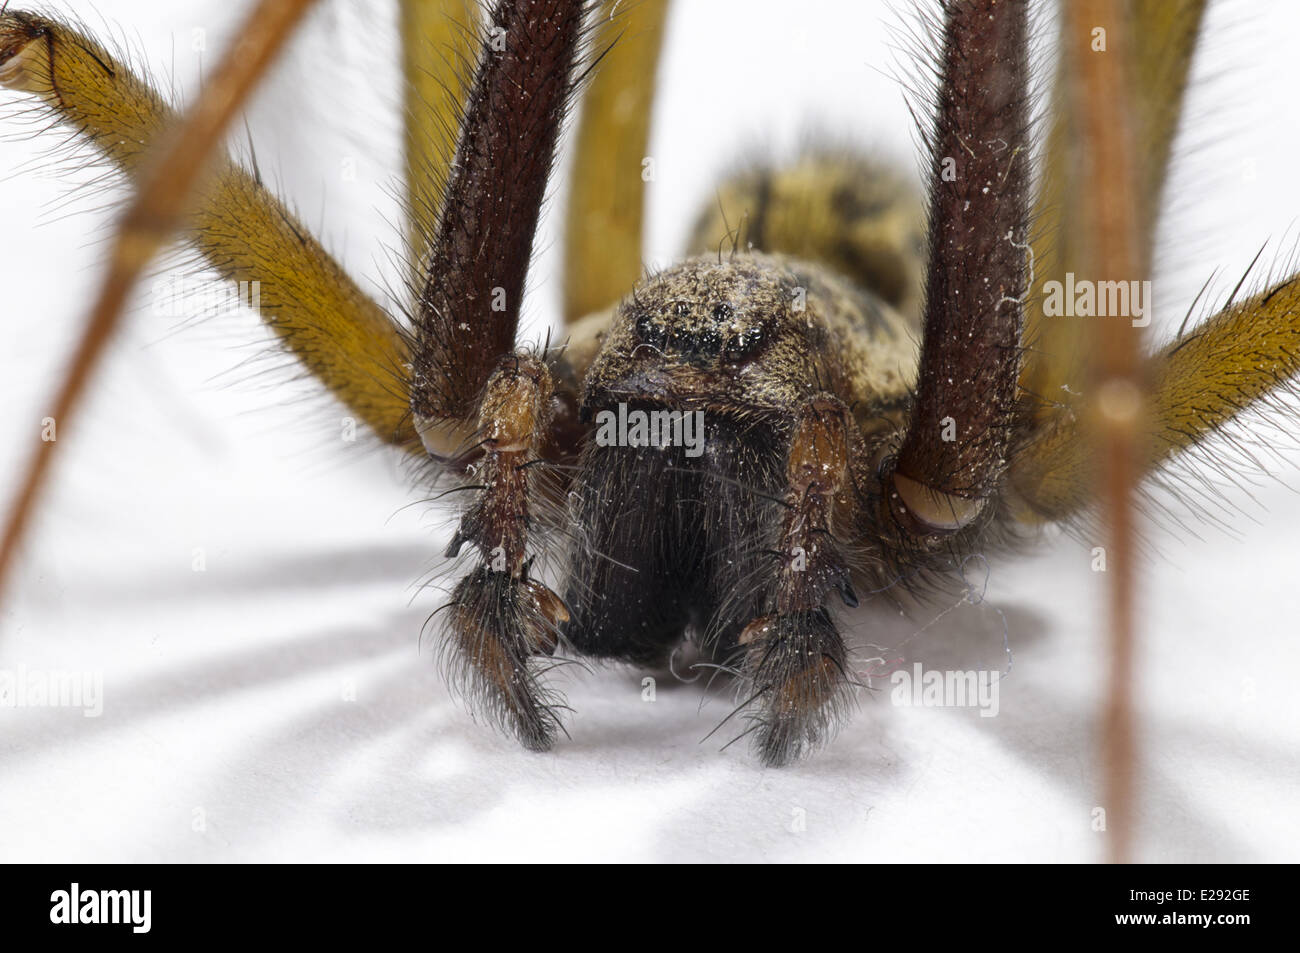 Giant House Spider (Tegenaria gigantea) adult male, close-up of head and palps Stock Photo